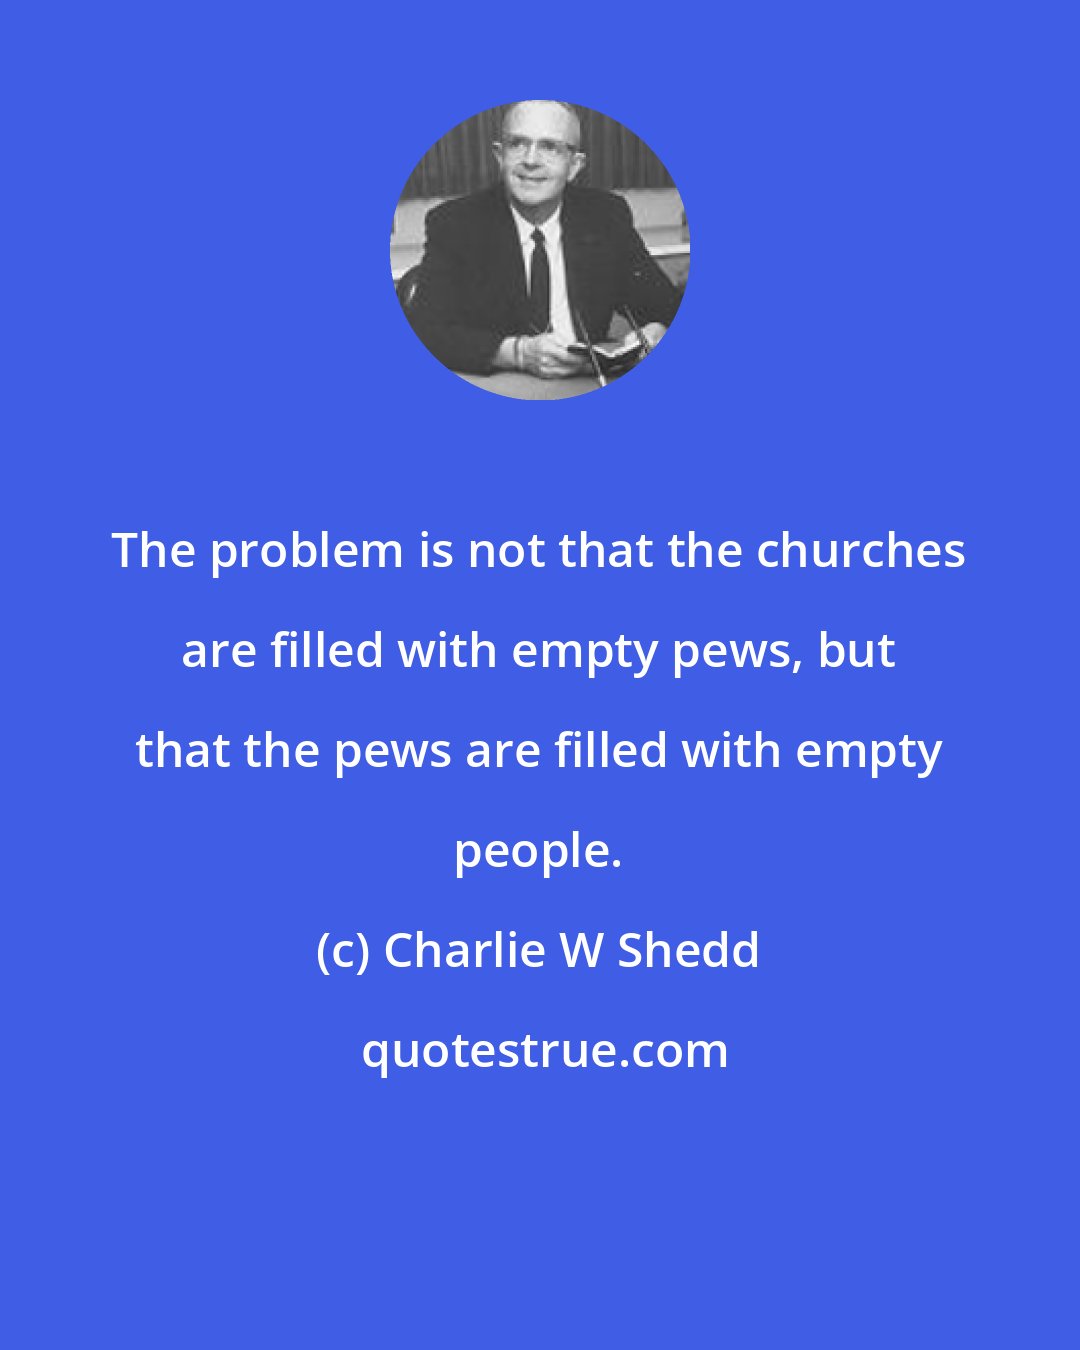 Charlie W Shedd: The problem is not that the churches are filled with empty pews, but that the pews are filled with empty people.